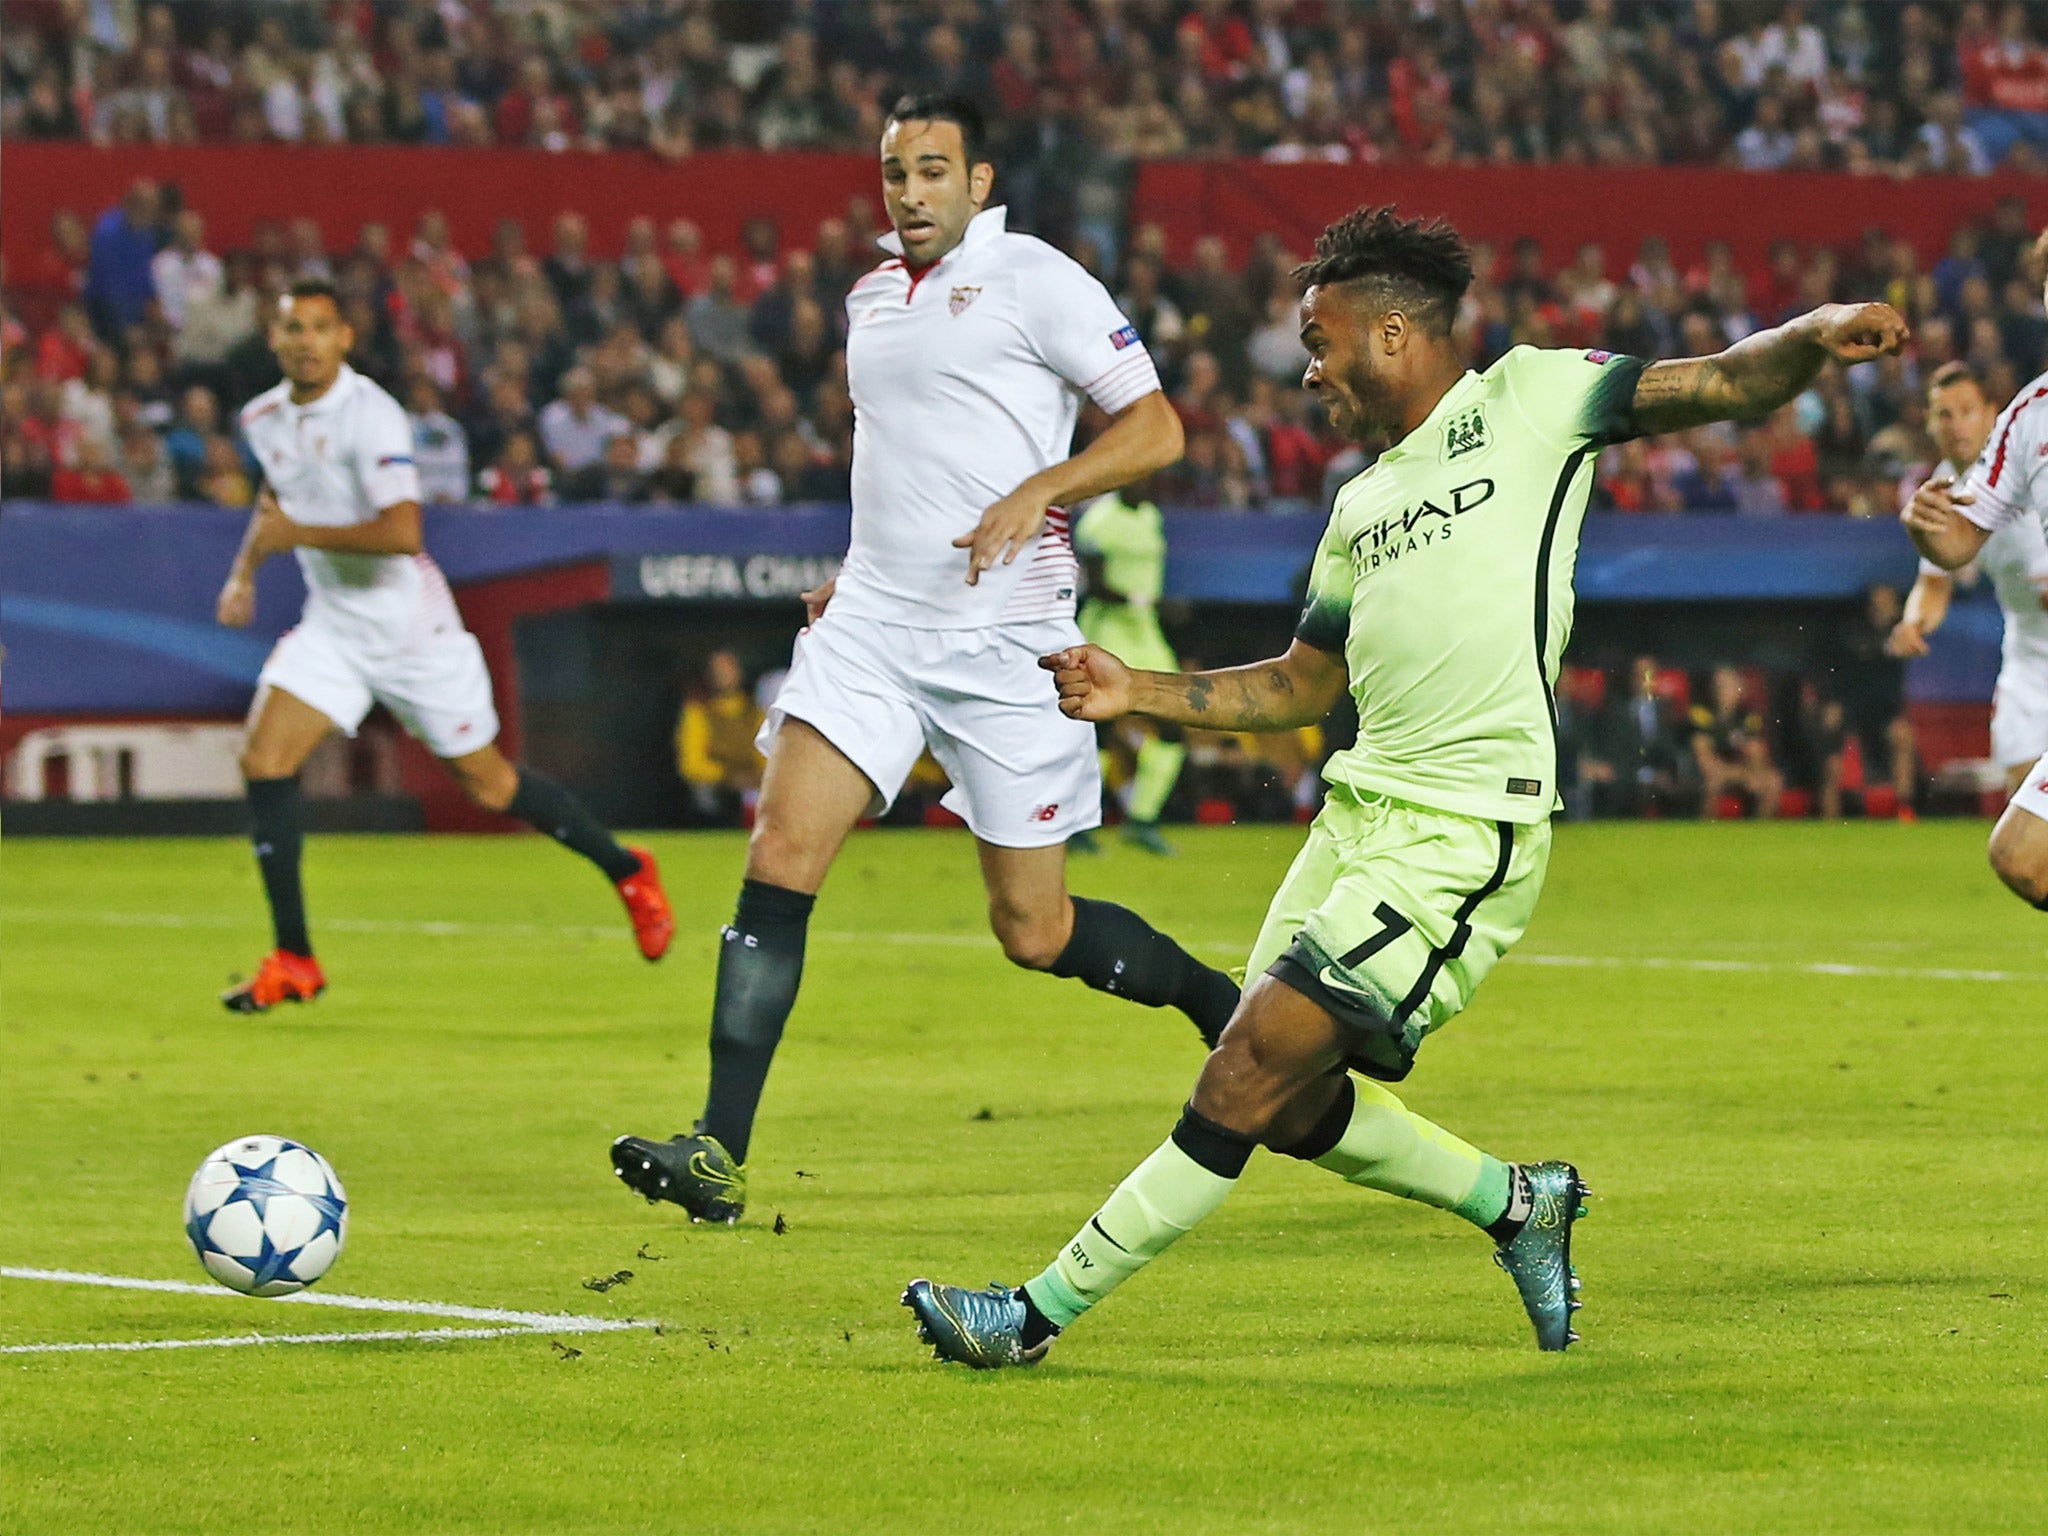 Raheem Sterling scores City's first